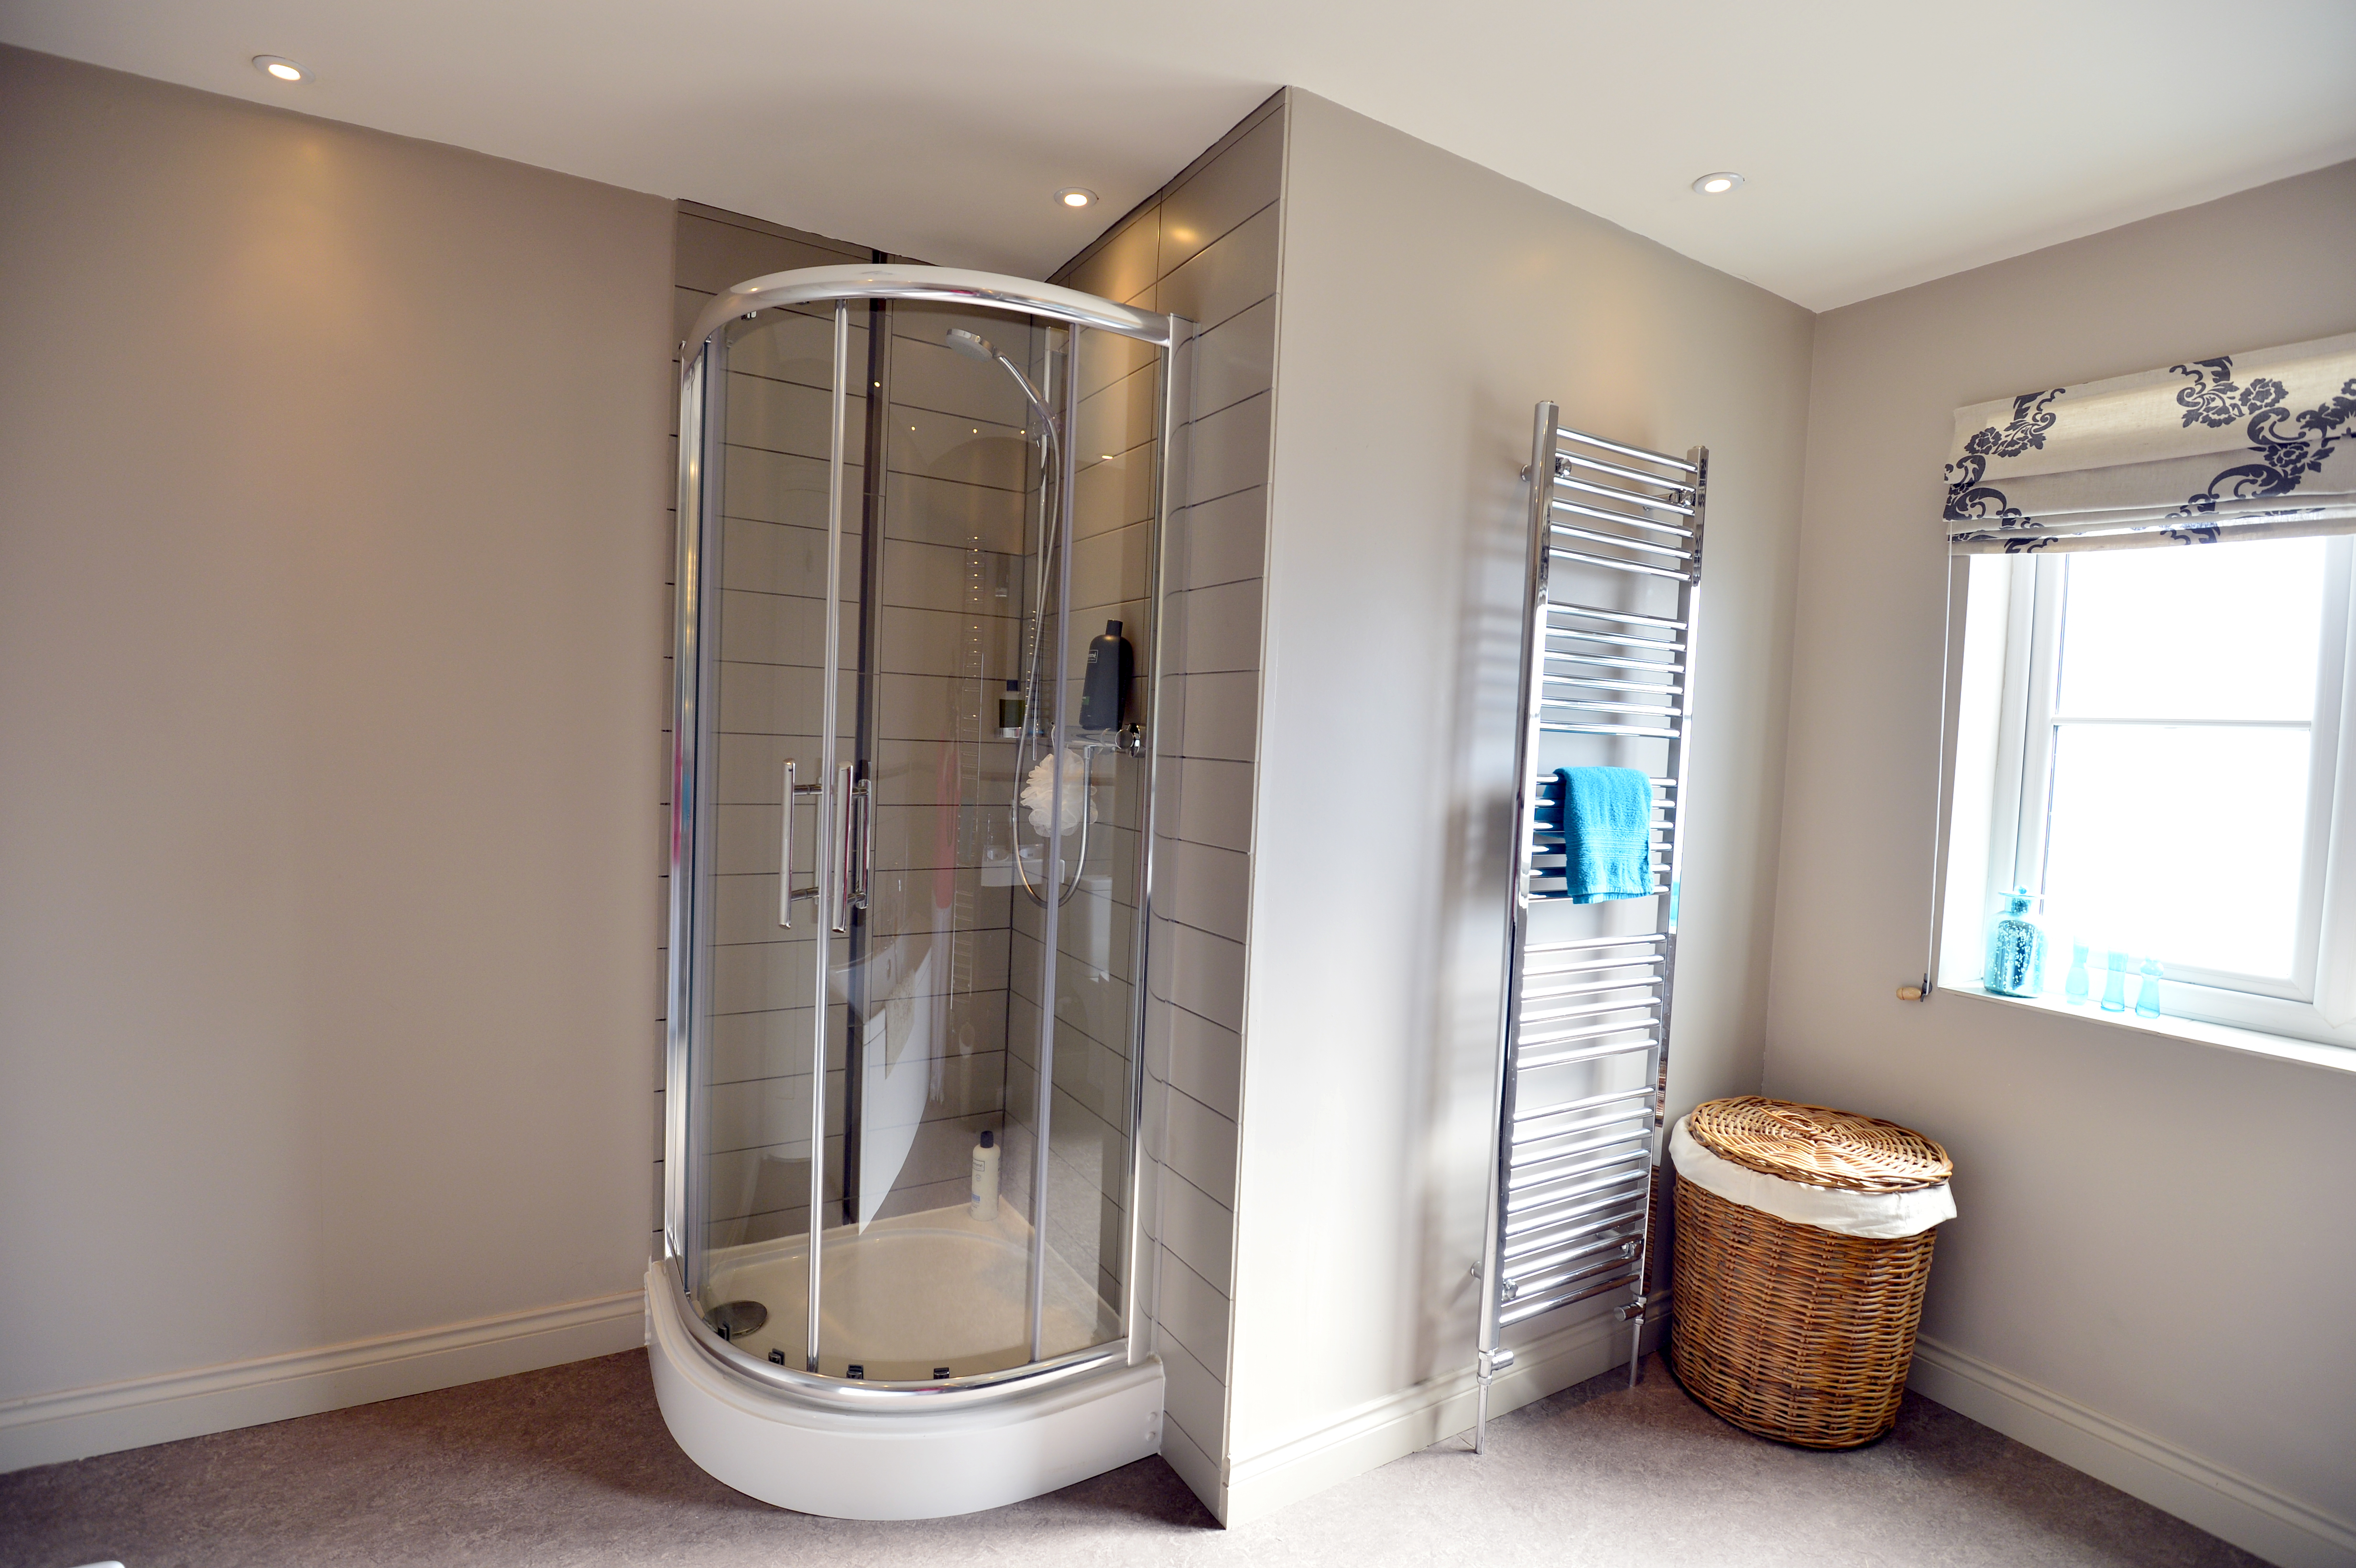 Bathroom Interior Design in Cublington, Buckinghamshire by Sarah Maidment Interiors, Brighton, Hove and East Sussex